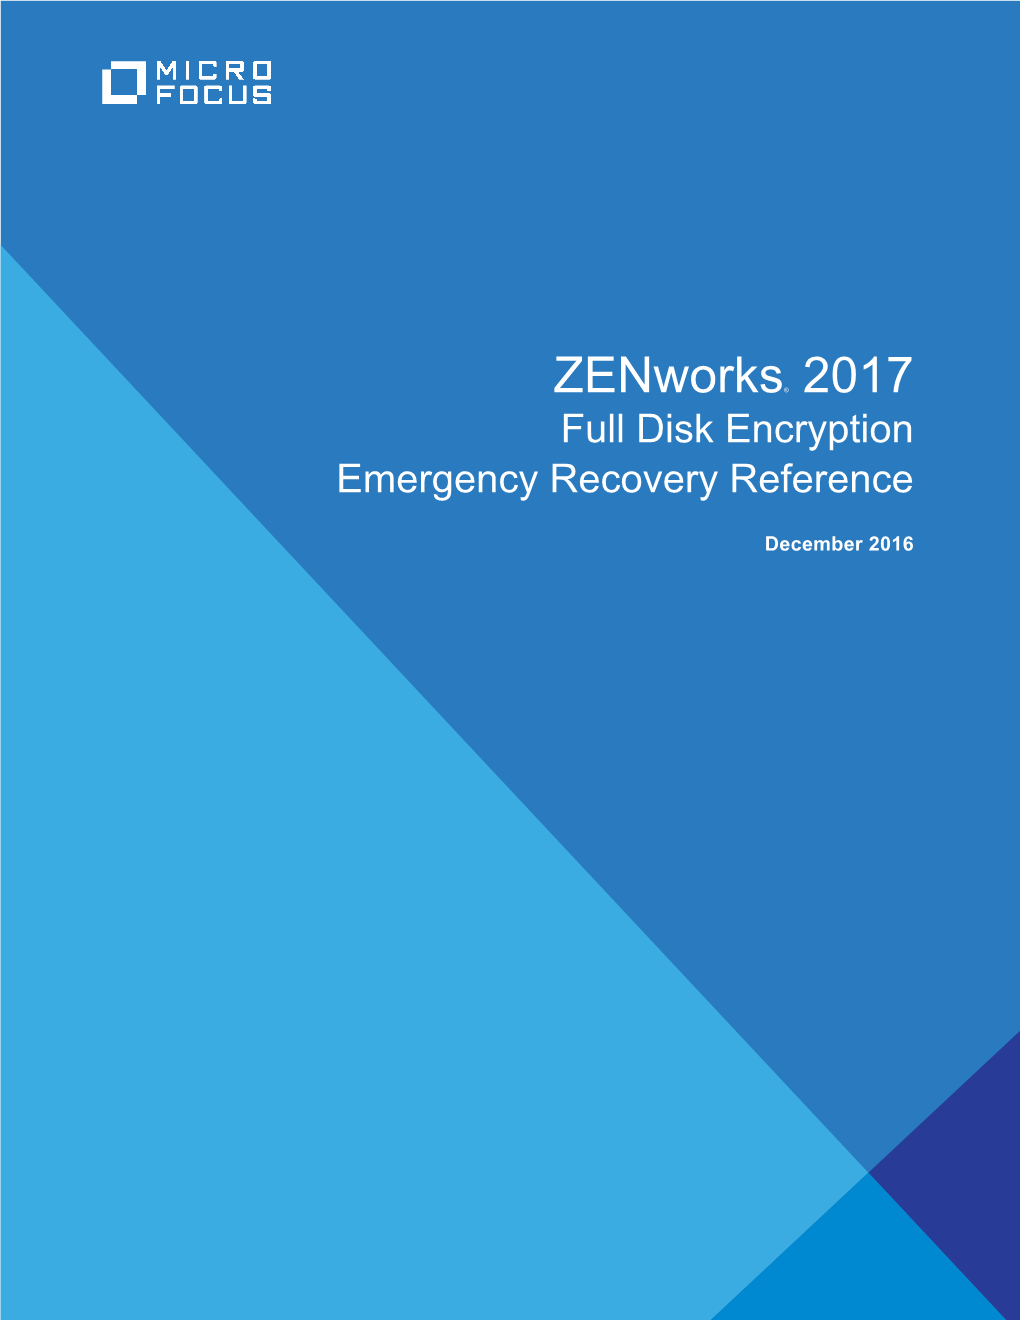 Zenworks Full Disk Encryption Emergency Recovery Reference